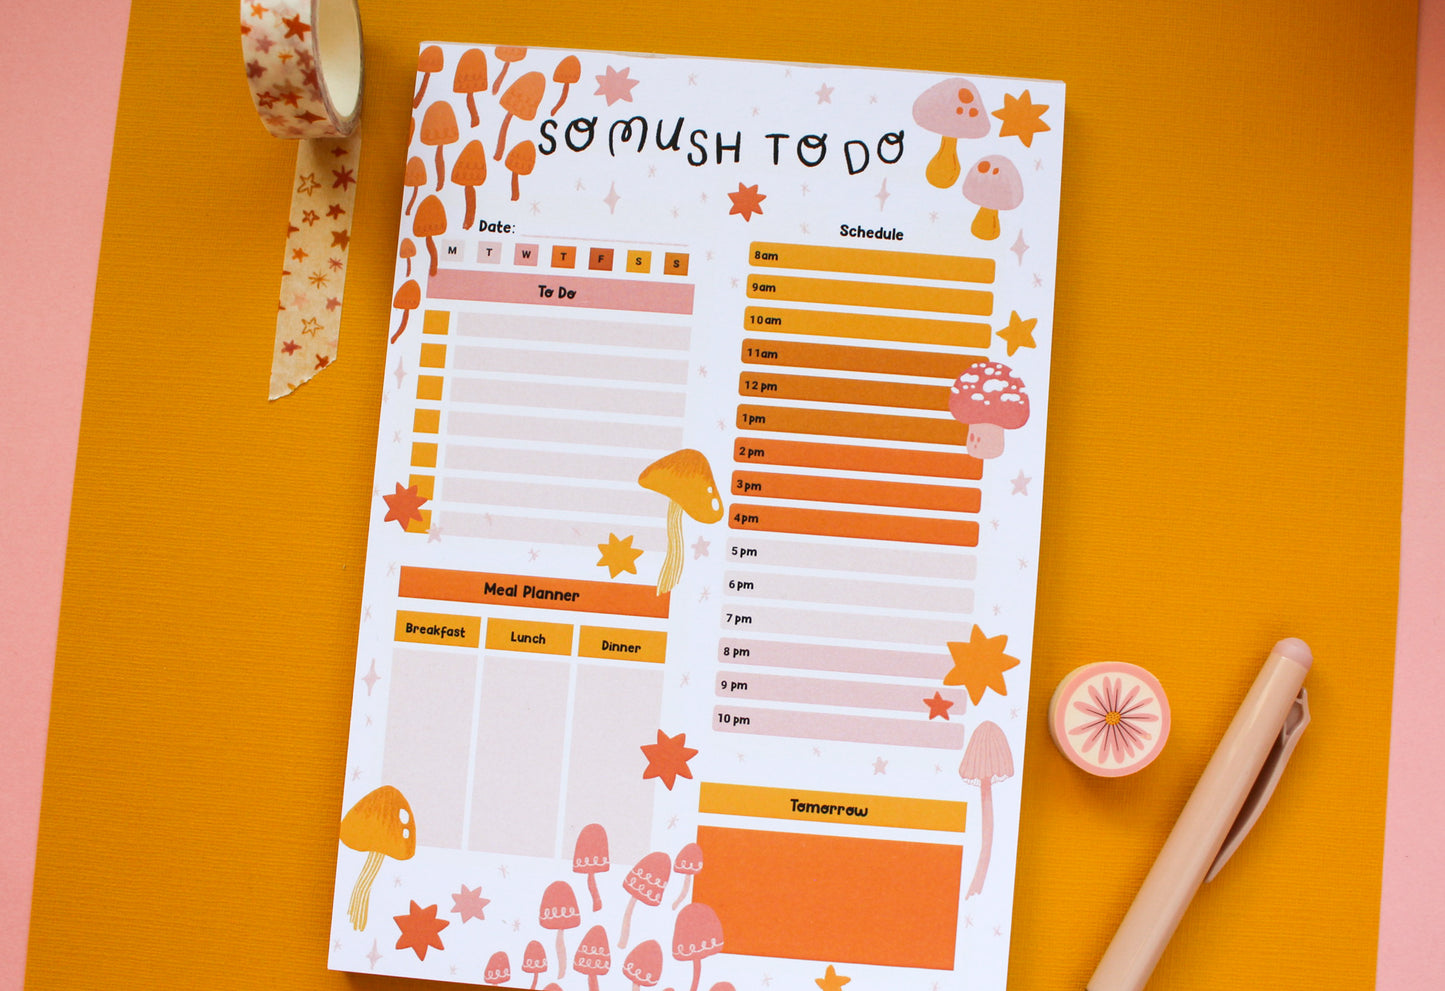 A5 Daily Planner Mushroom 'so mush to do'  Notepad - Colourful Stationery, Organisation, To Do